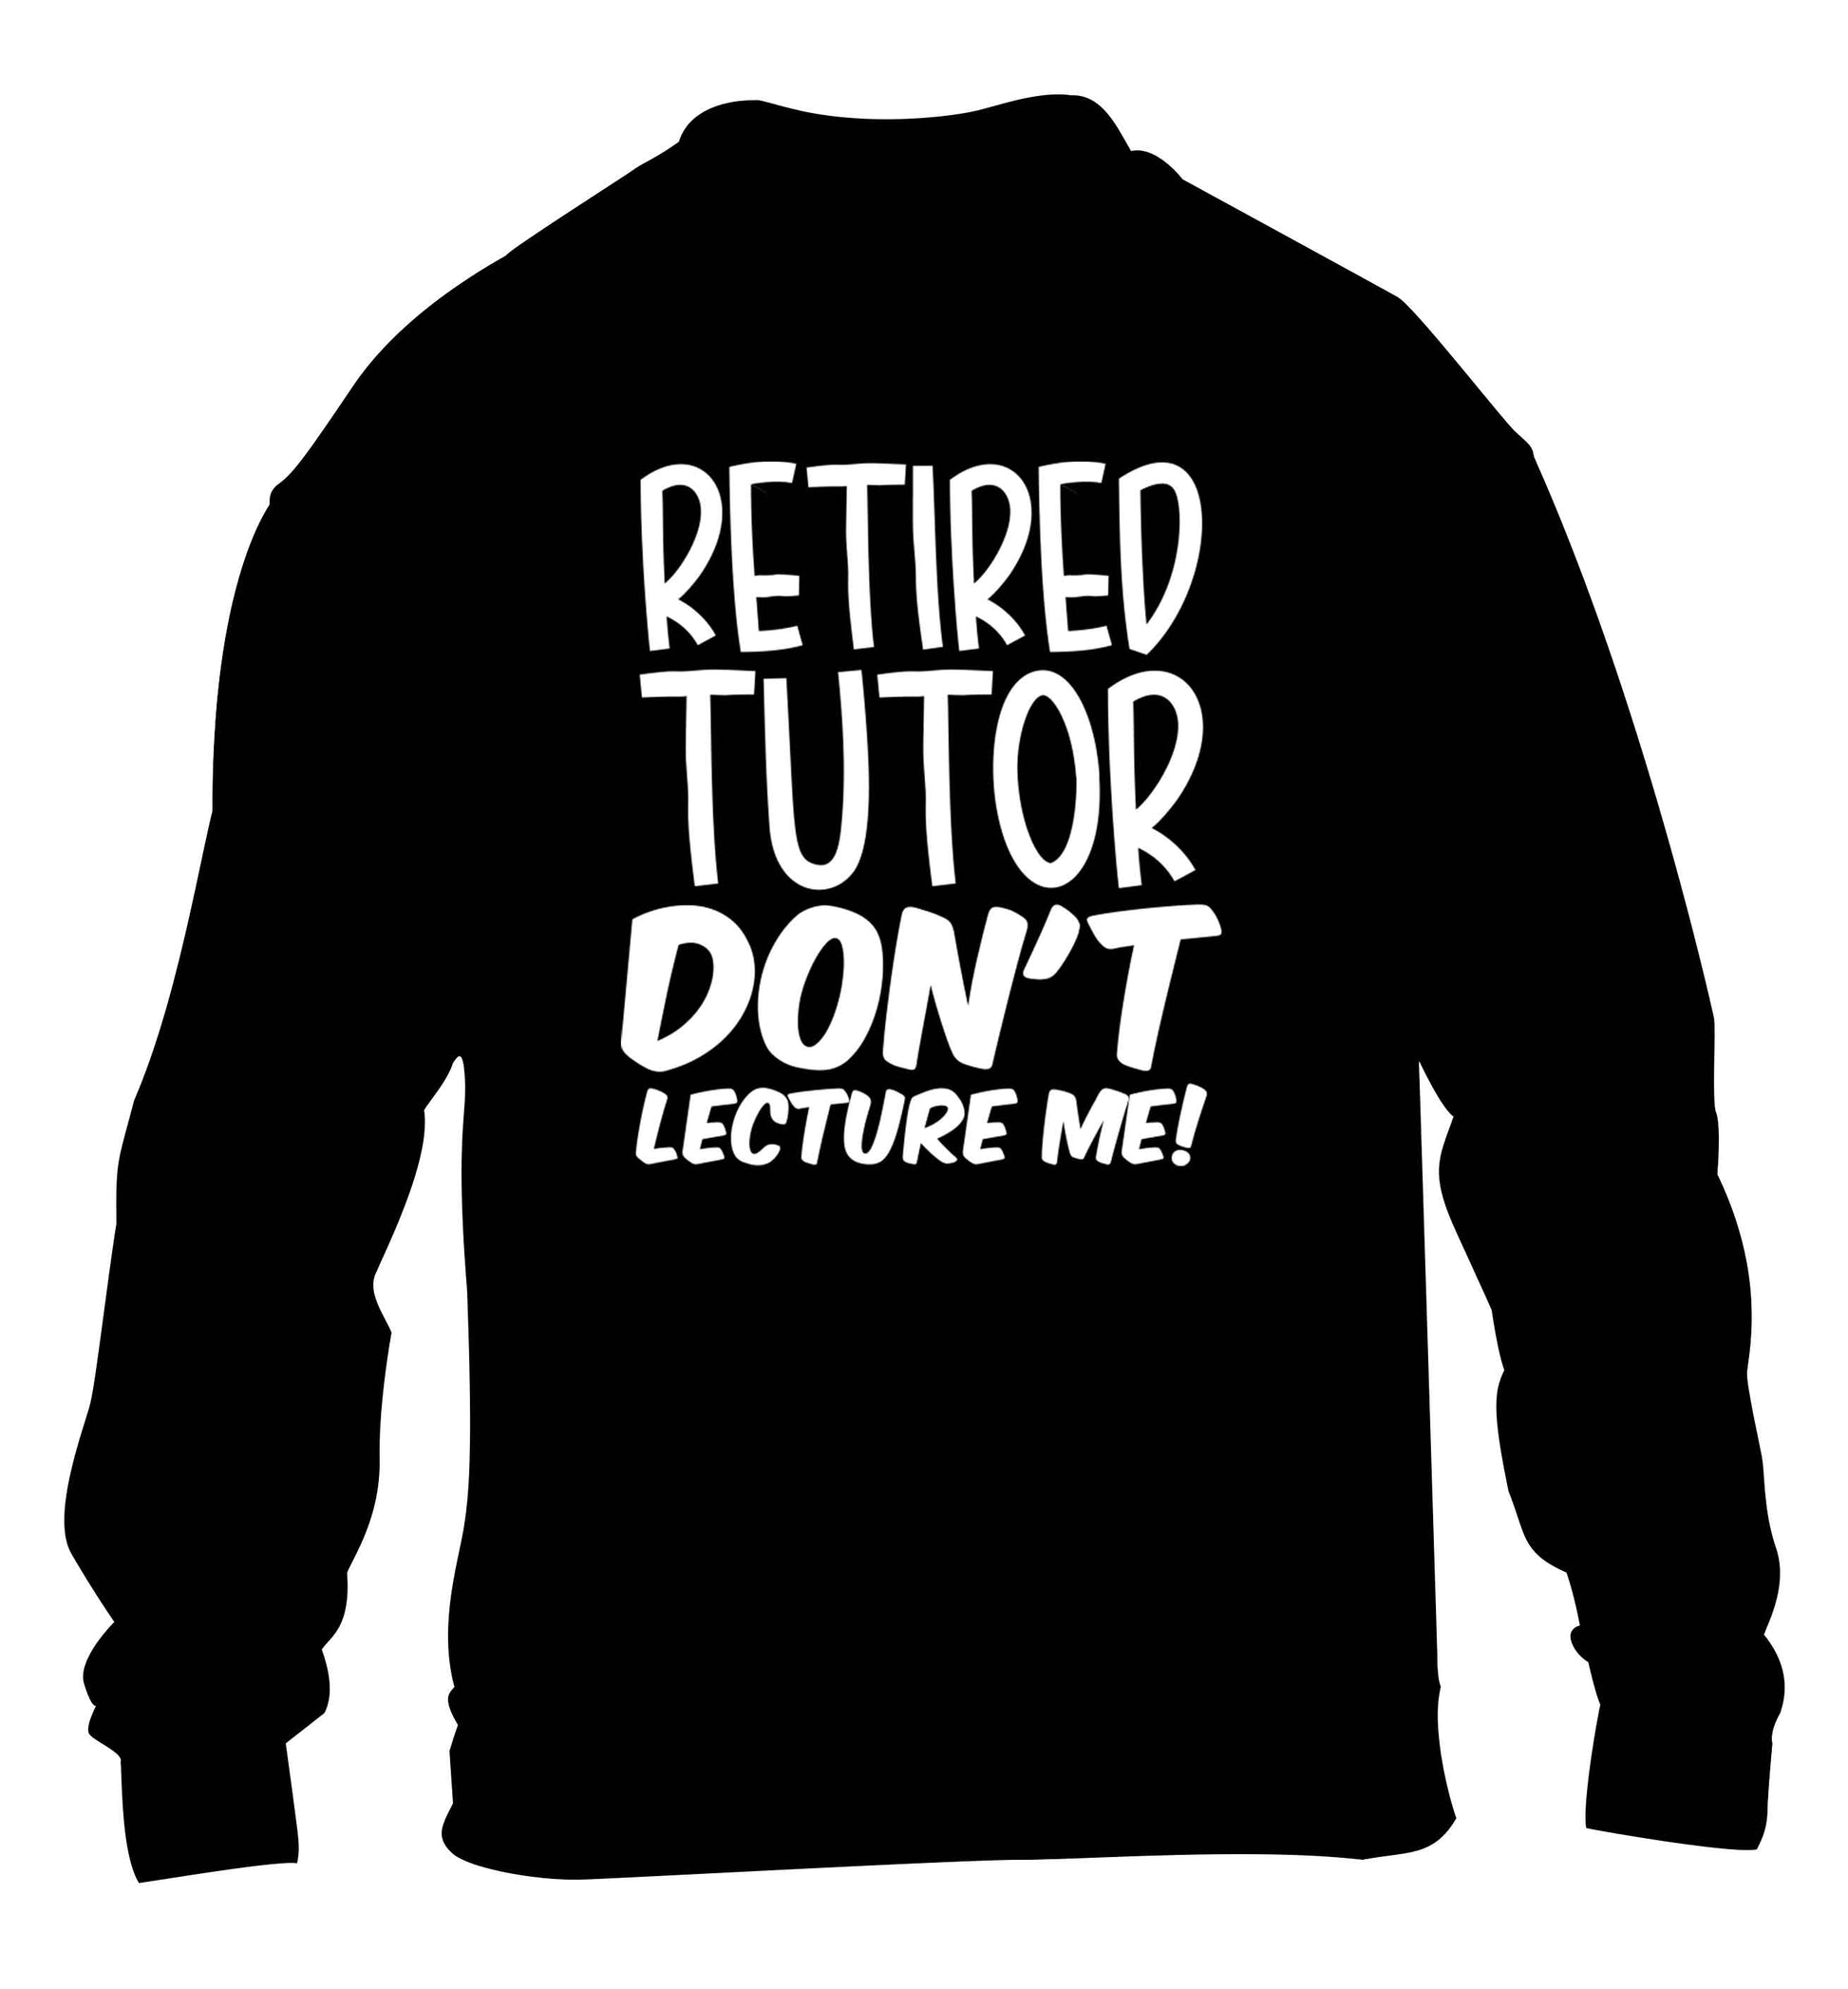 Retired tutor don't lecture me! children's black sweater 12-13 Years